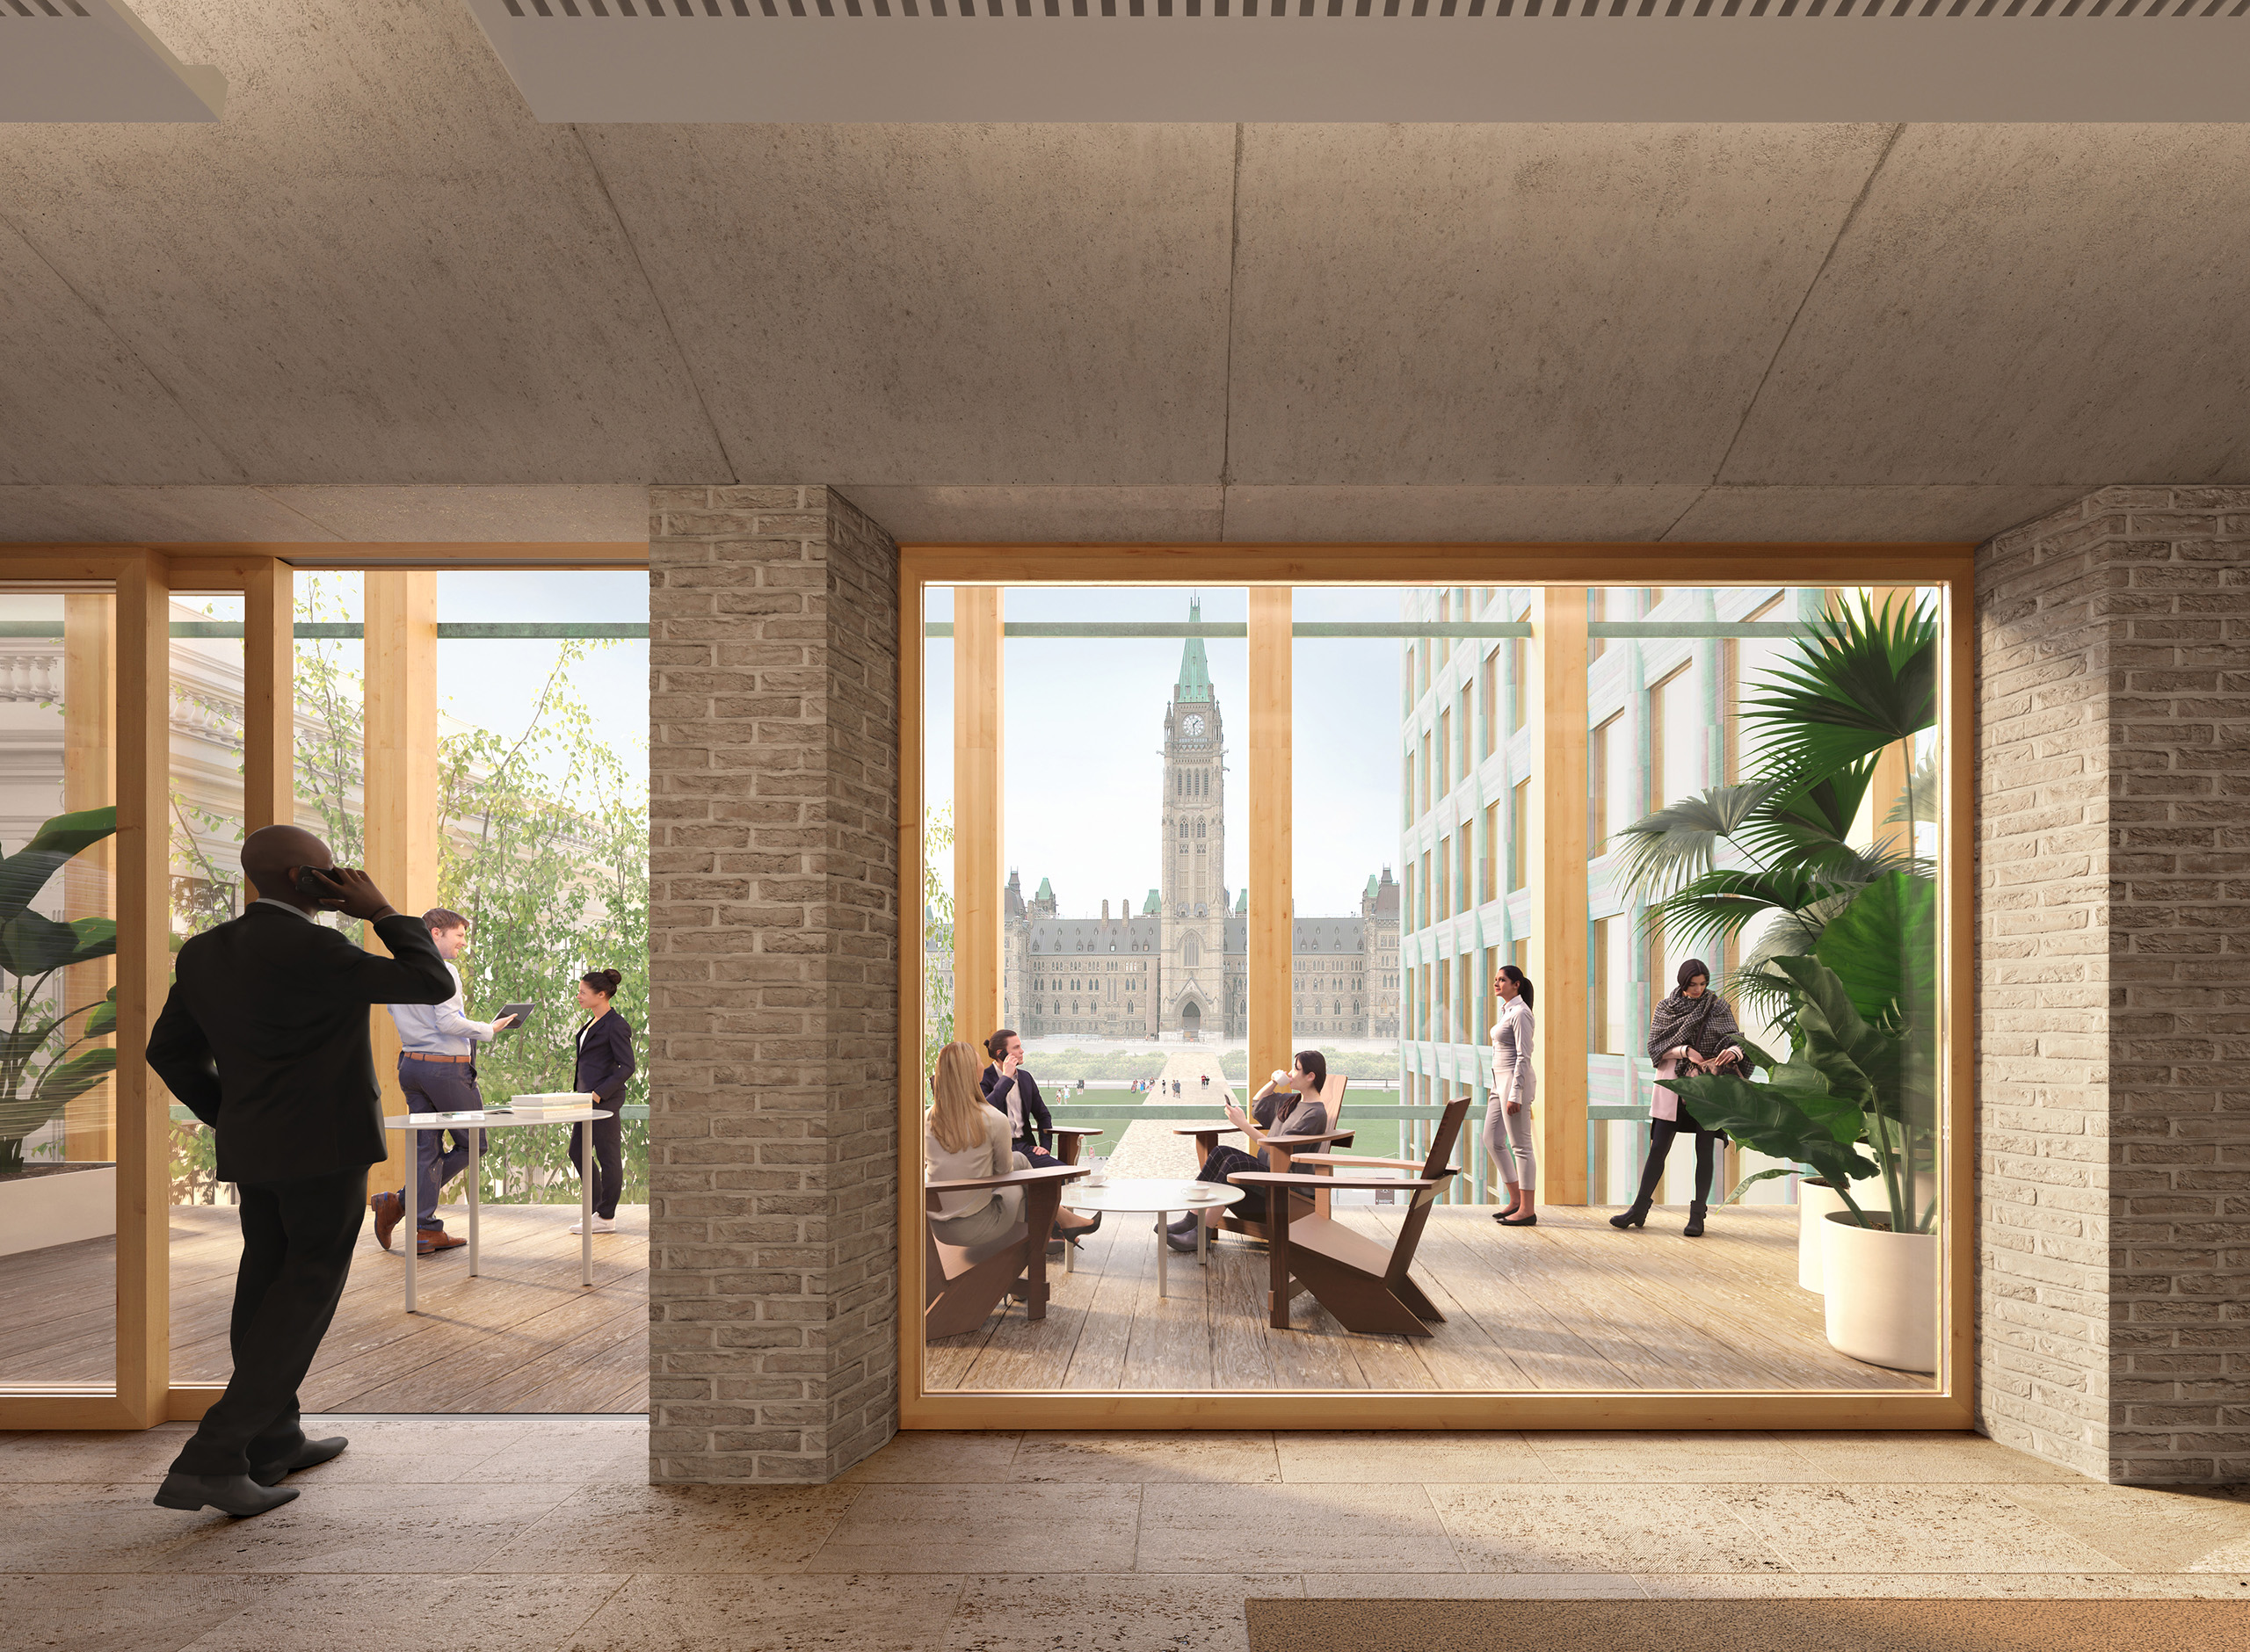 The planned collaboration space overlooks Parliamentary Hill